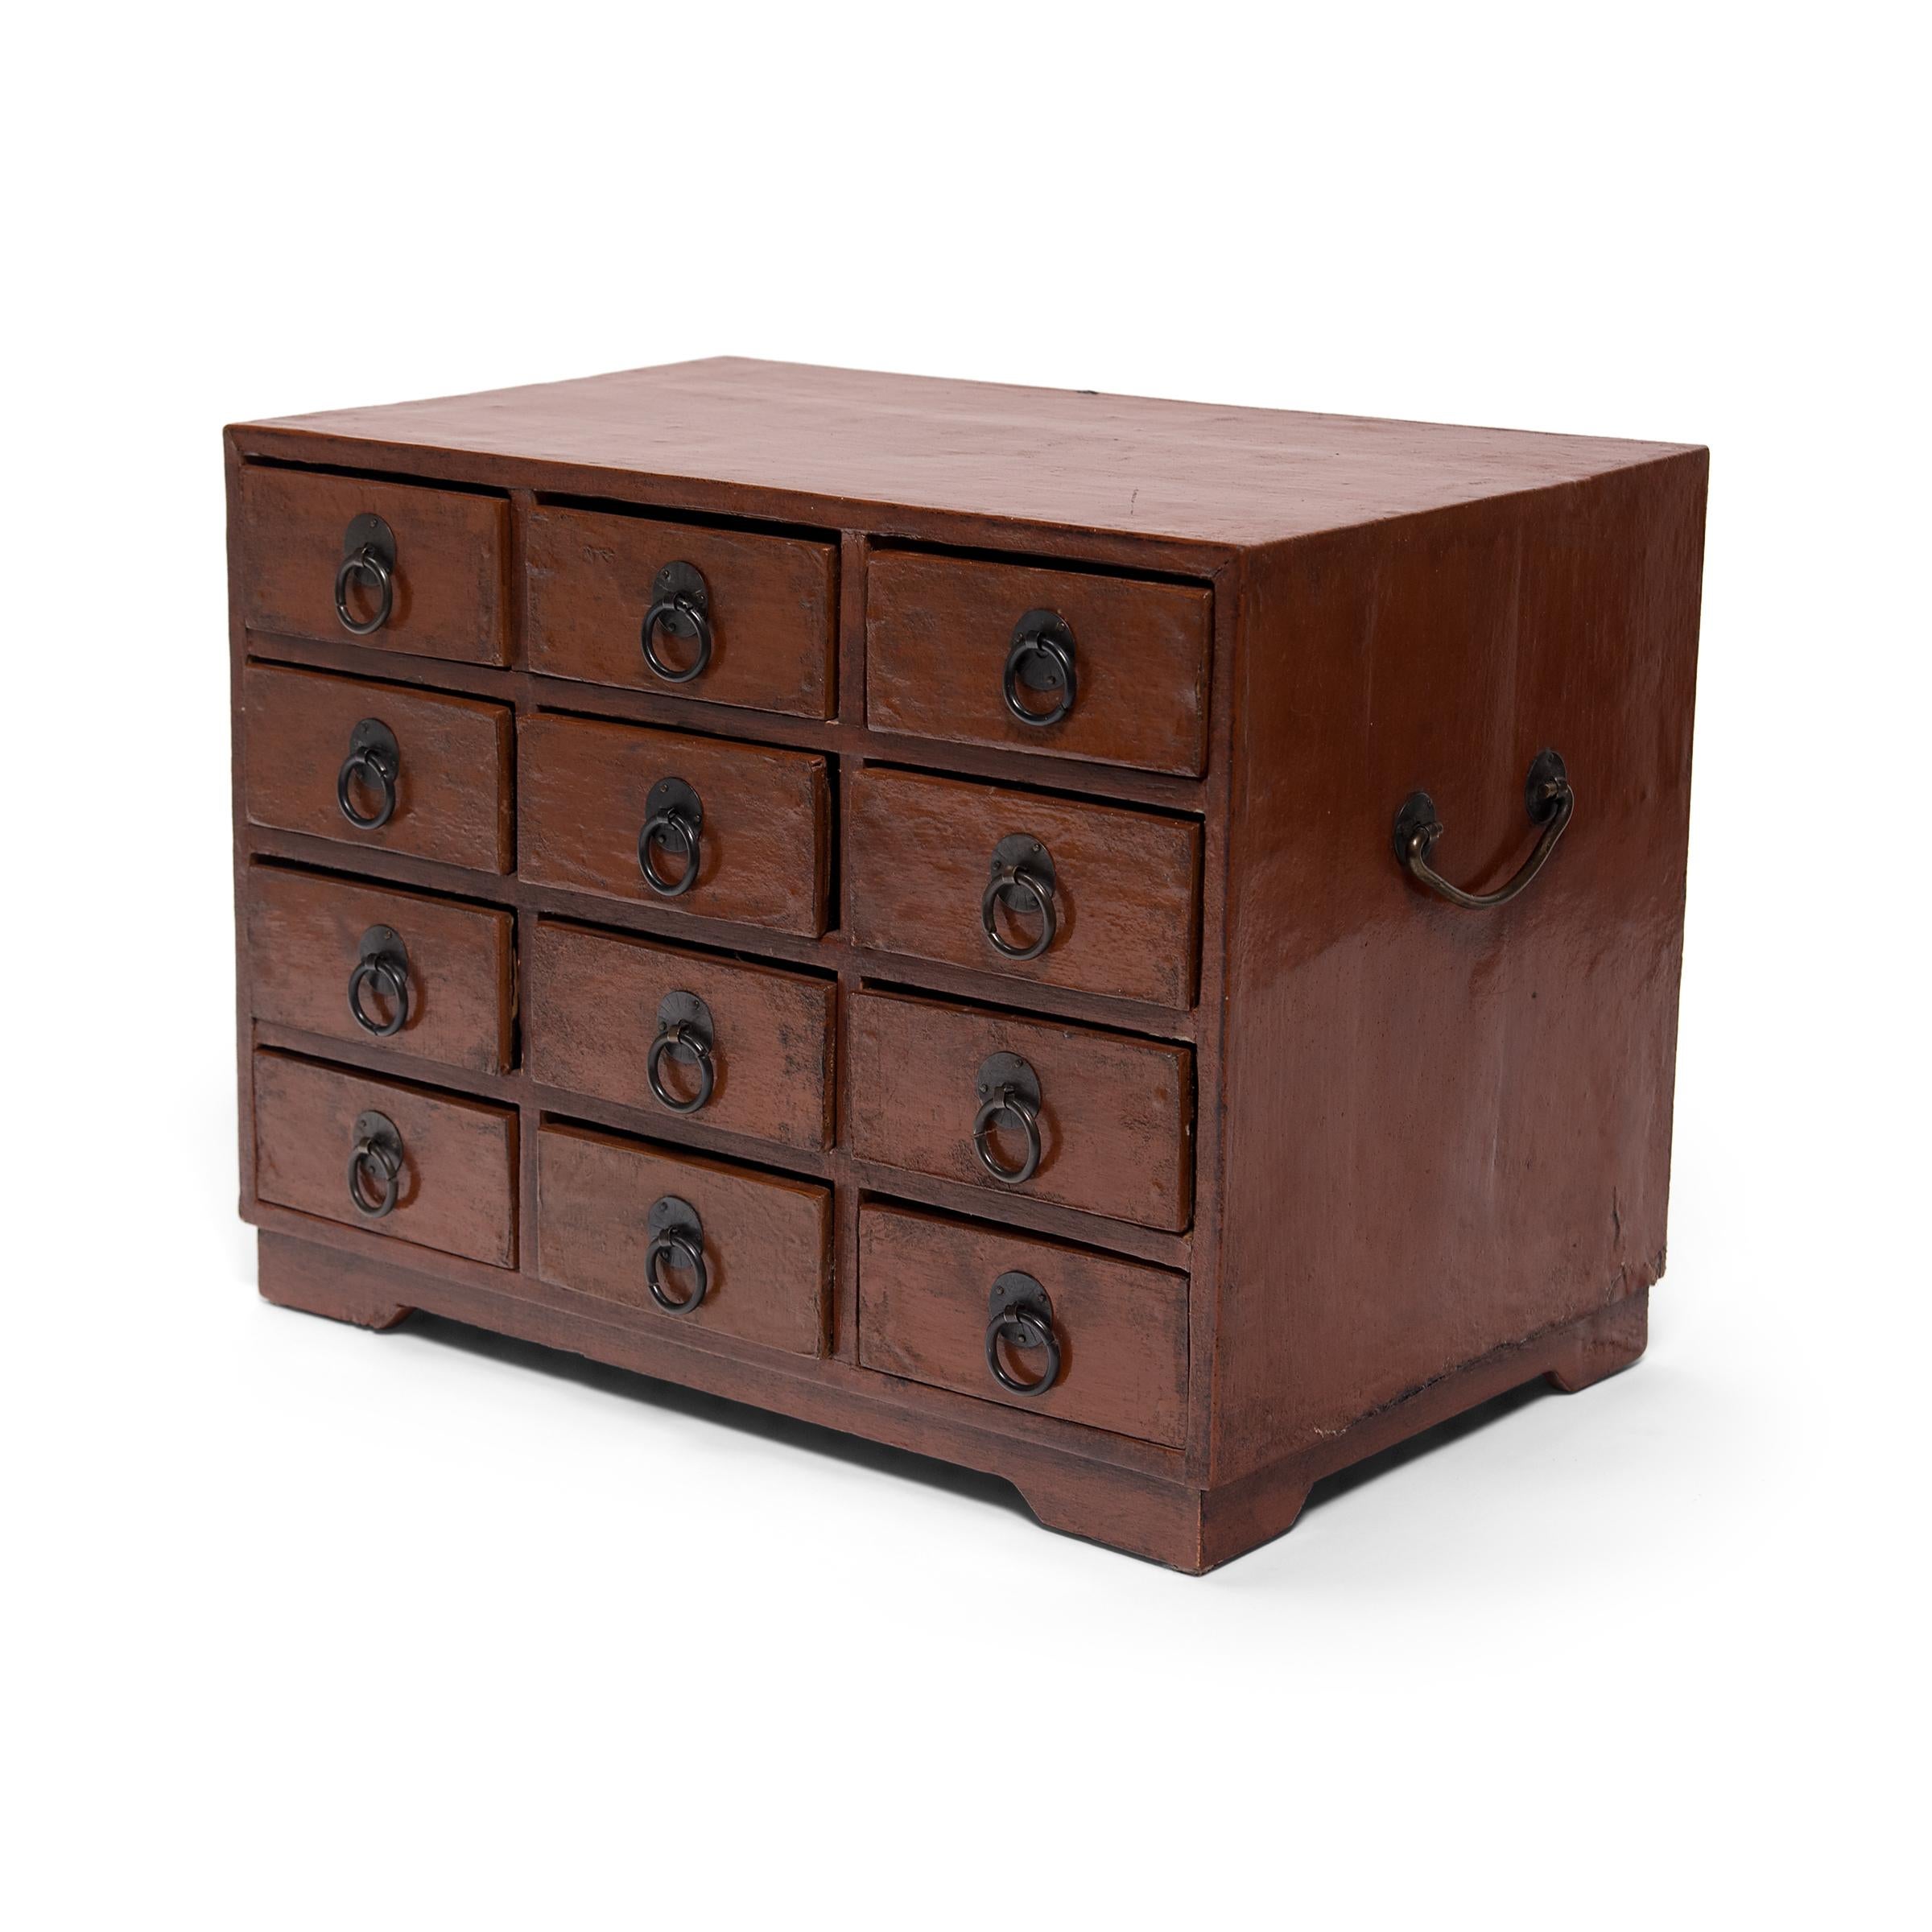 This early 20th century petite chest of drawers is an example of the multifunctional boxes used tabletop in lieu of a larger cabinets. Such boxes were used to store cosmetics, jewelry, documents, and other accessories. This chest clearly borrows its